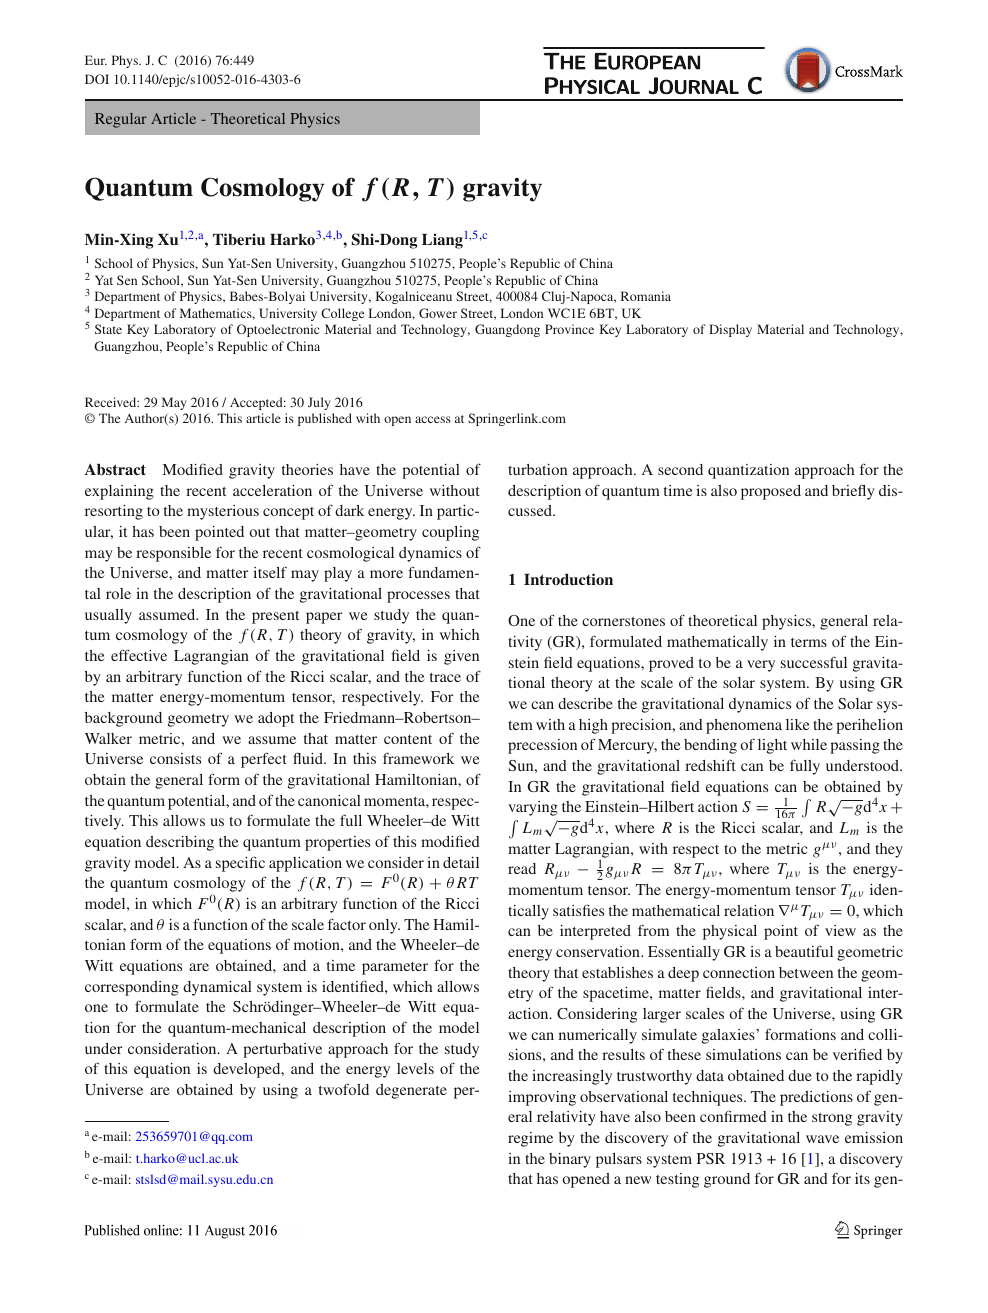 Quantum Cosmology Of F R T Gravity Topic Of Research Paper In Physical Sciences Download Scholarly Article Pdf And Read For Free On Cyberleninka Open Science Hub